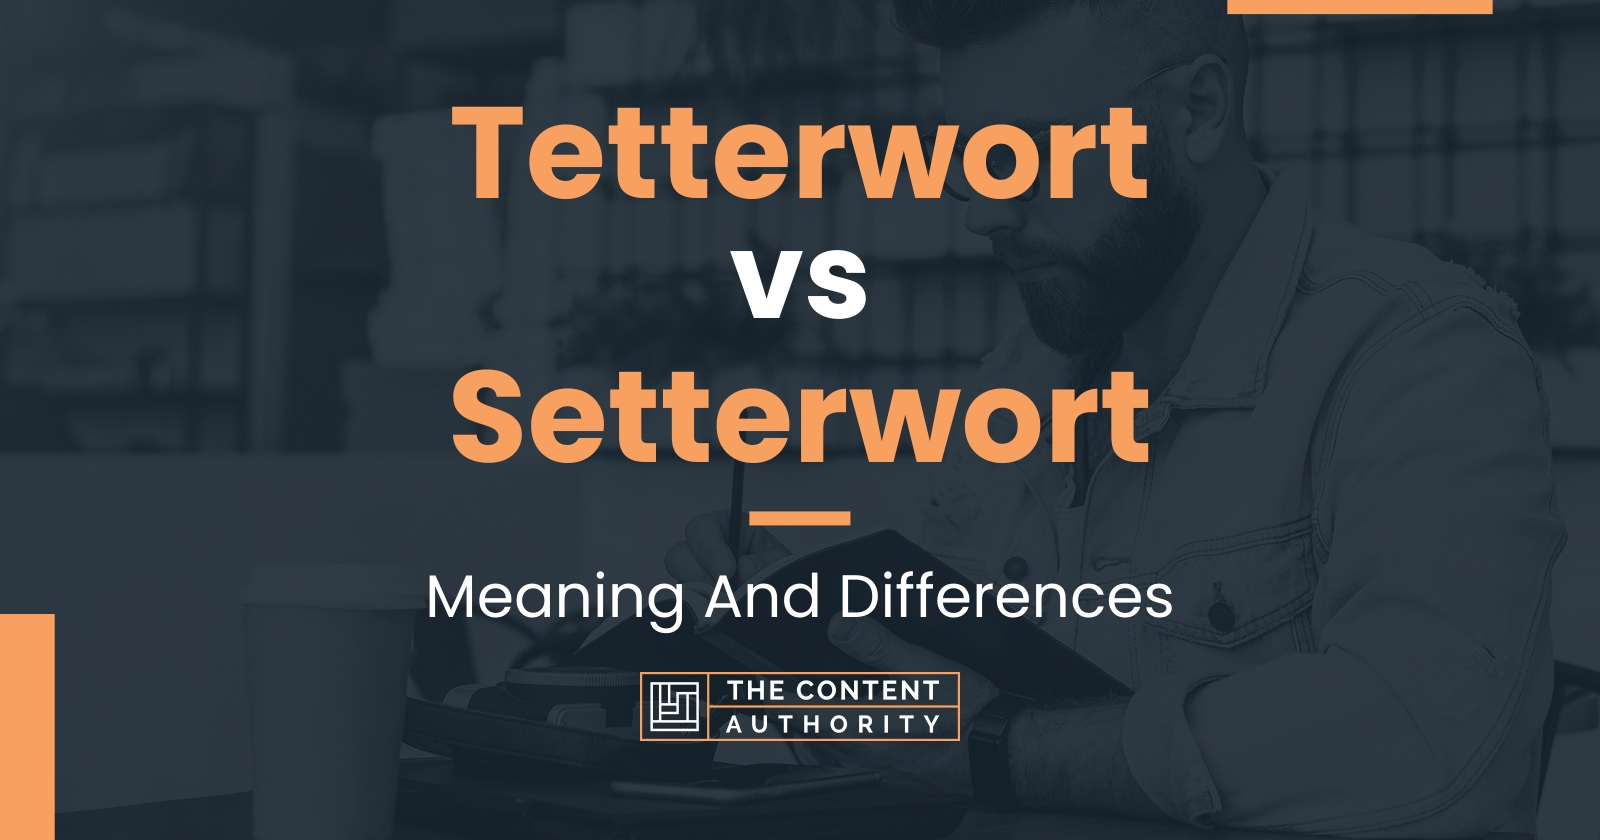 Tetterwort vs Setterwort: Meaning And Differences